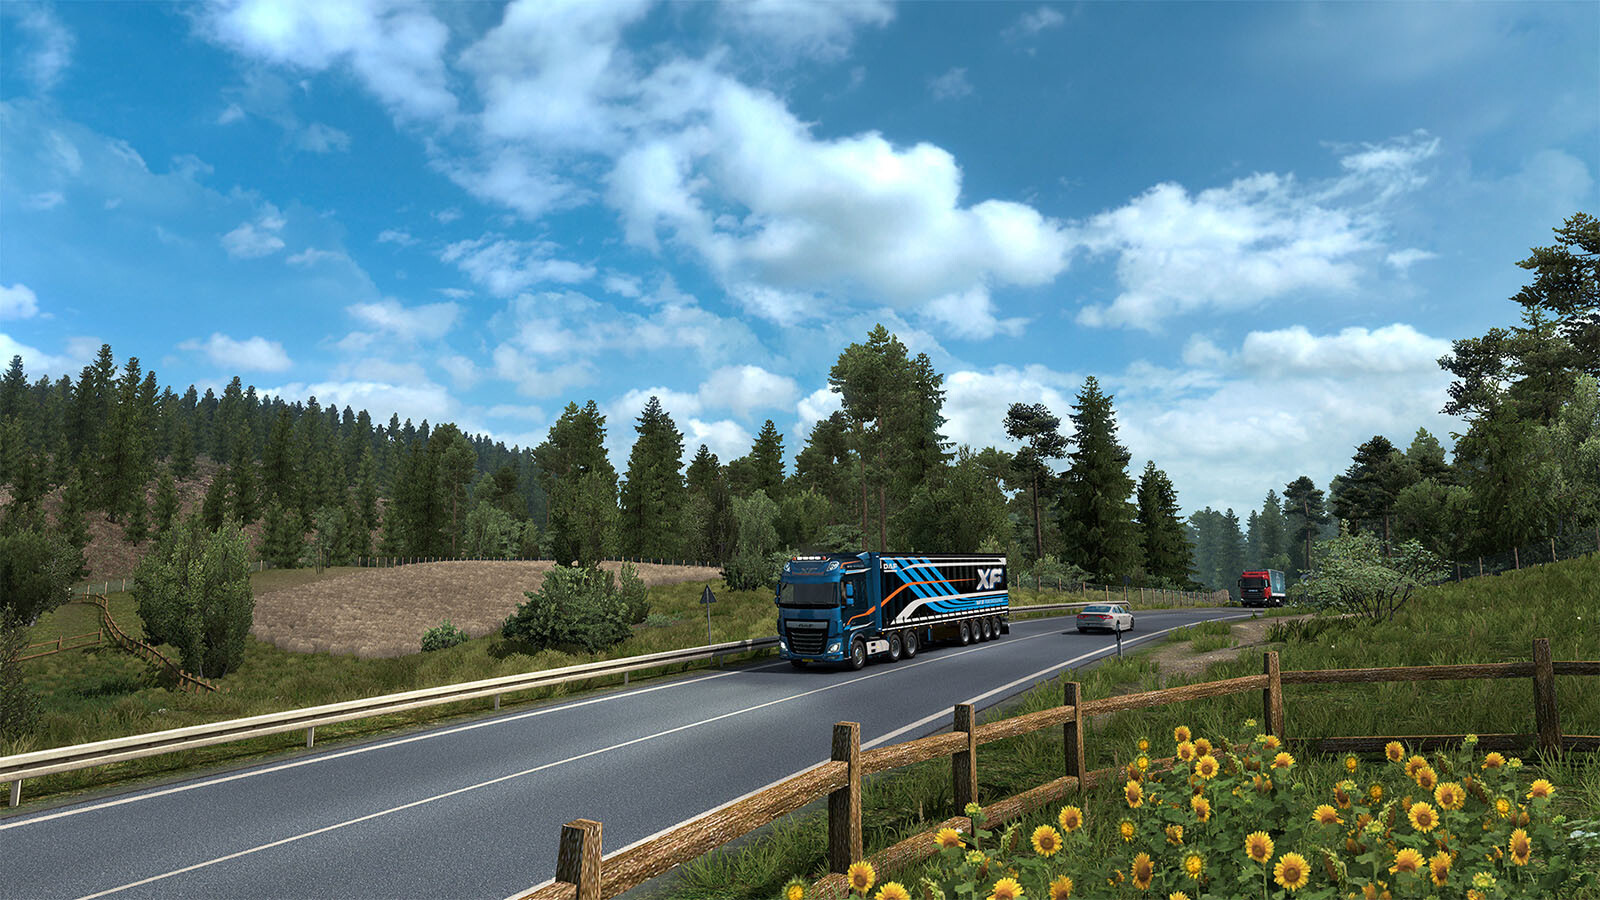 Euro Truck Simulator 2 Steam Key for PC, Mac and Linux - Buy now